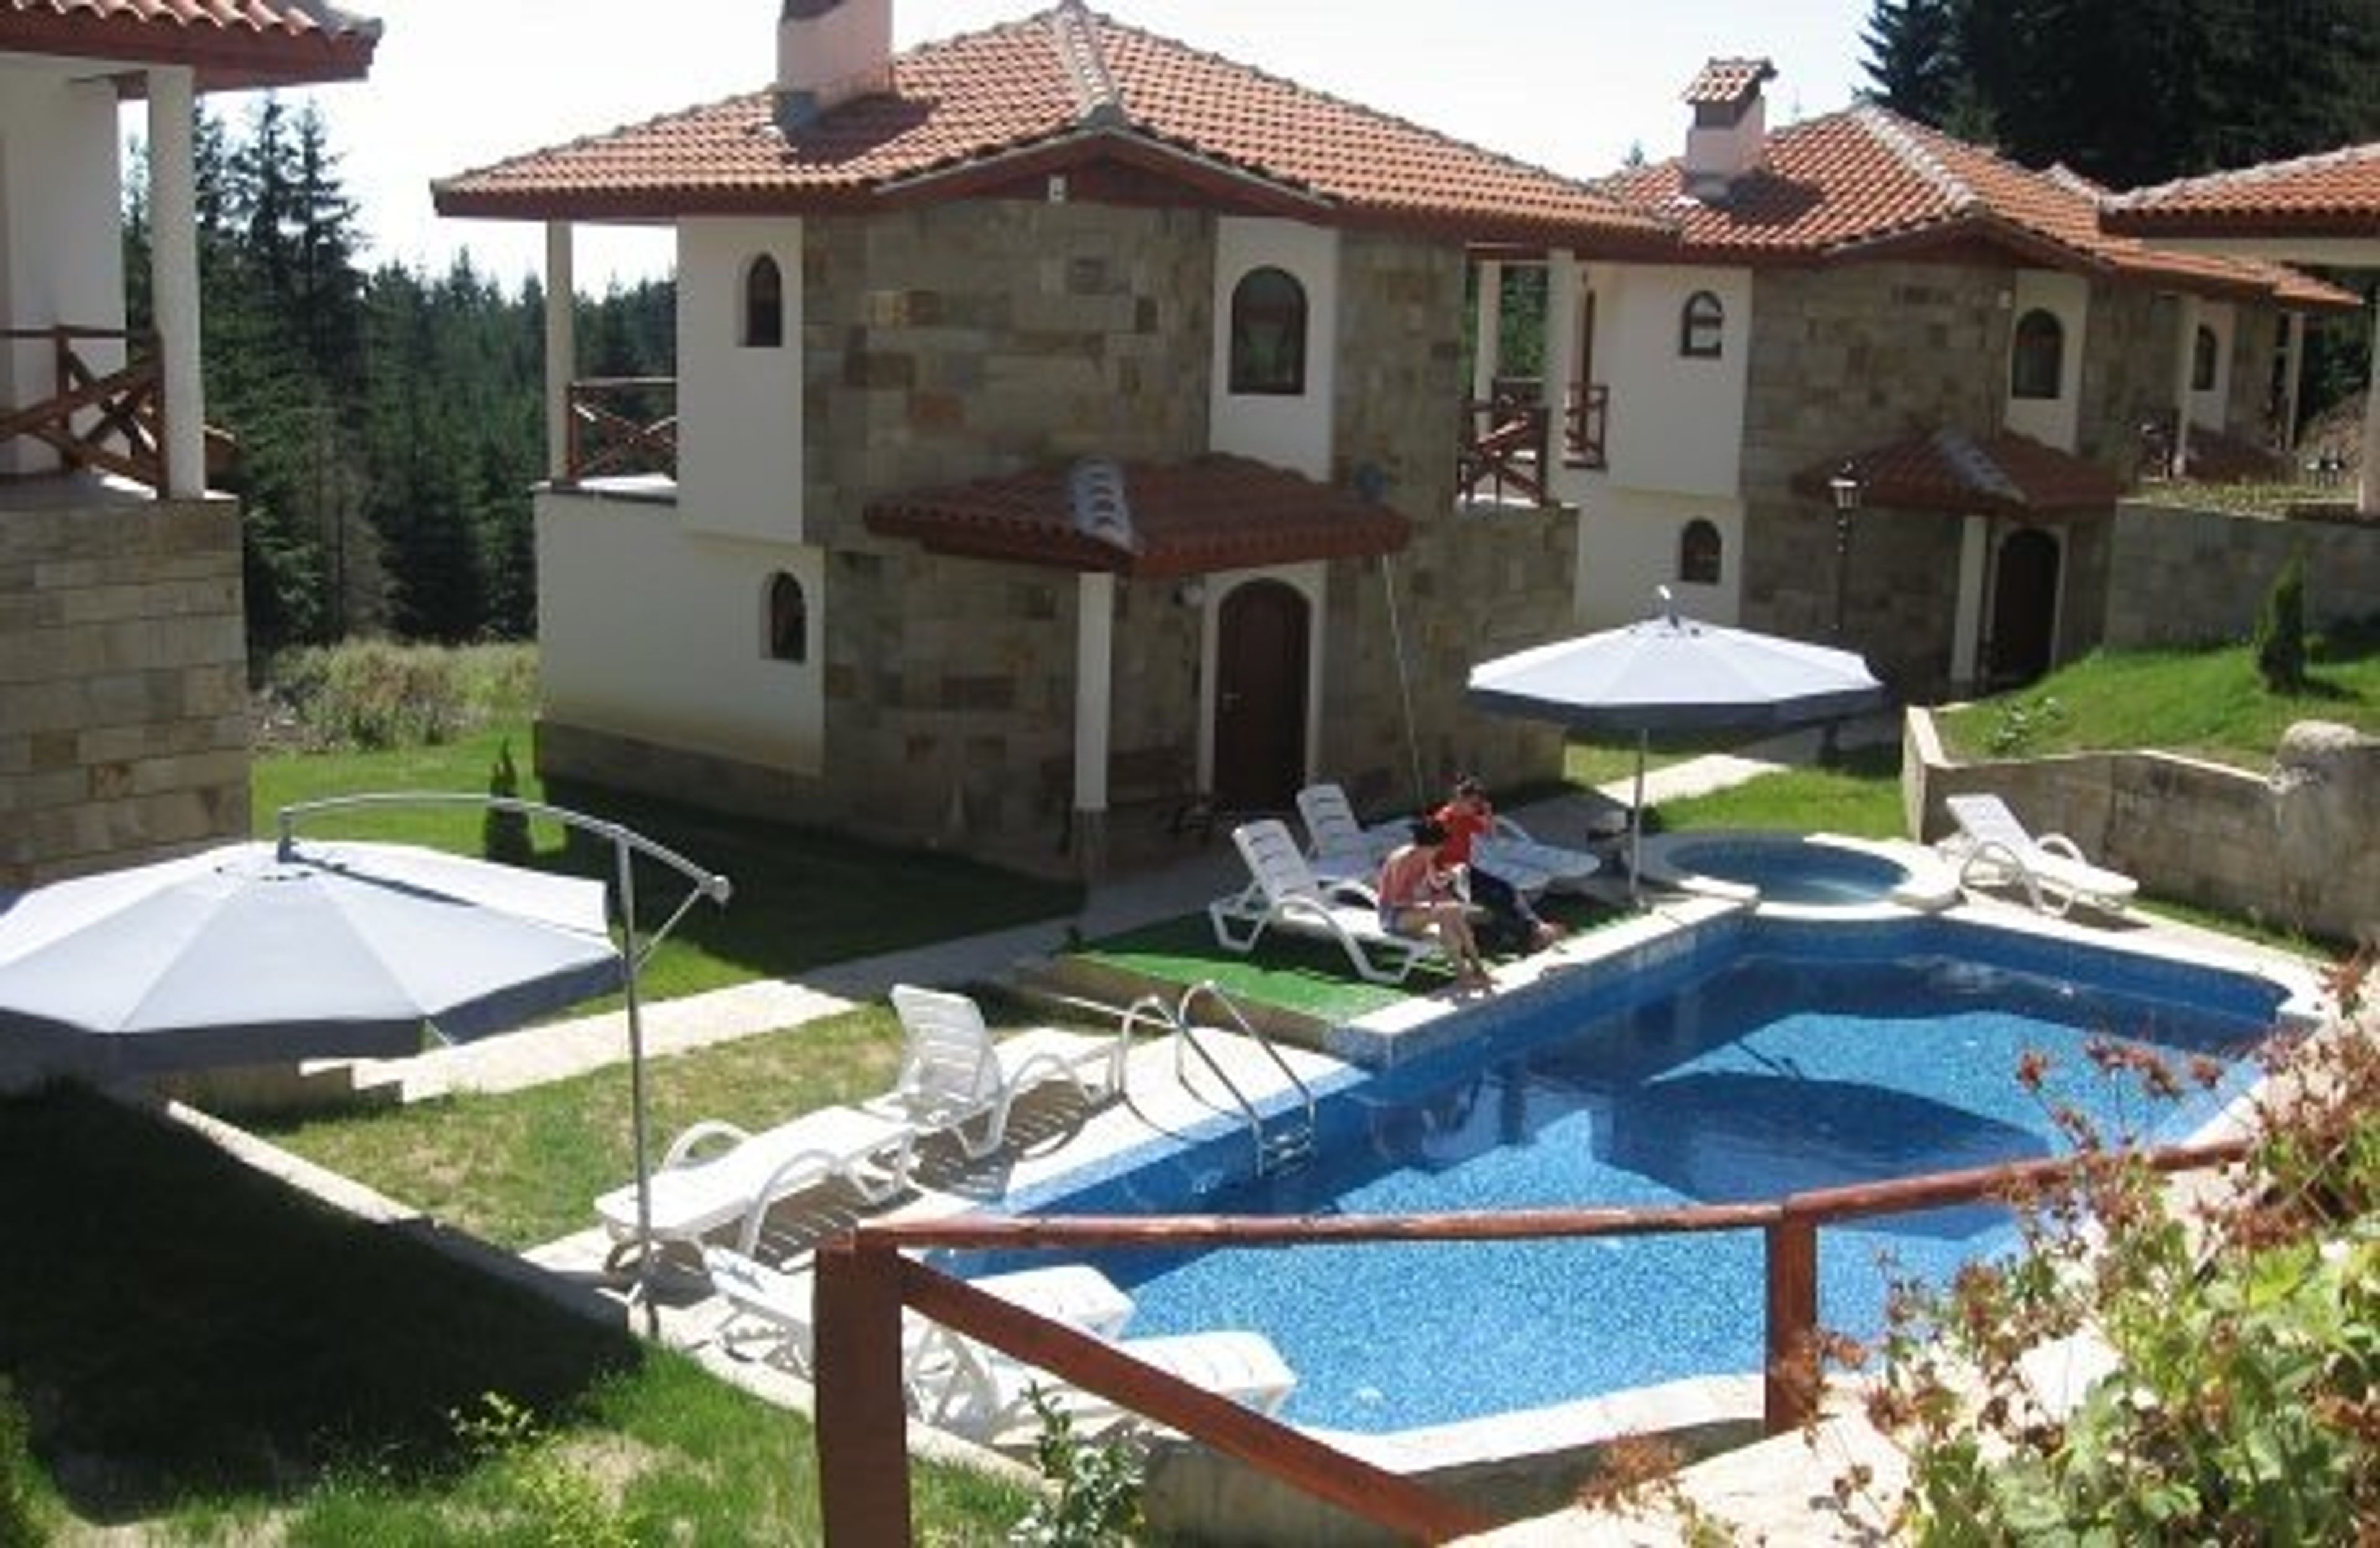 relax on the sun loungers or in the pool or jacuzzi